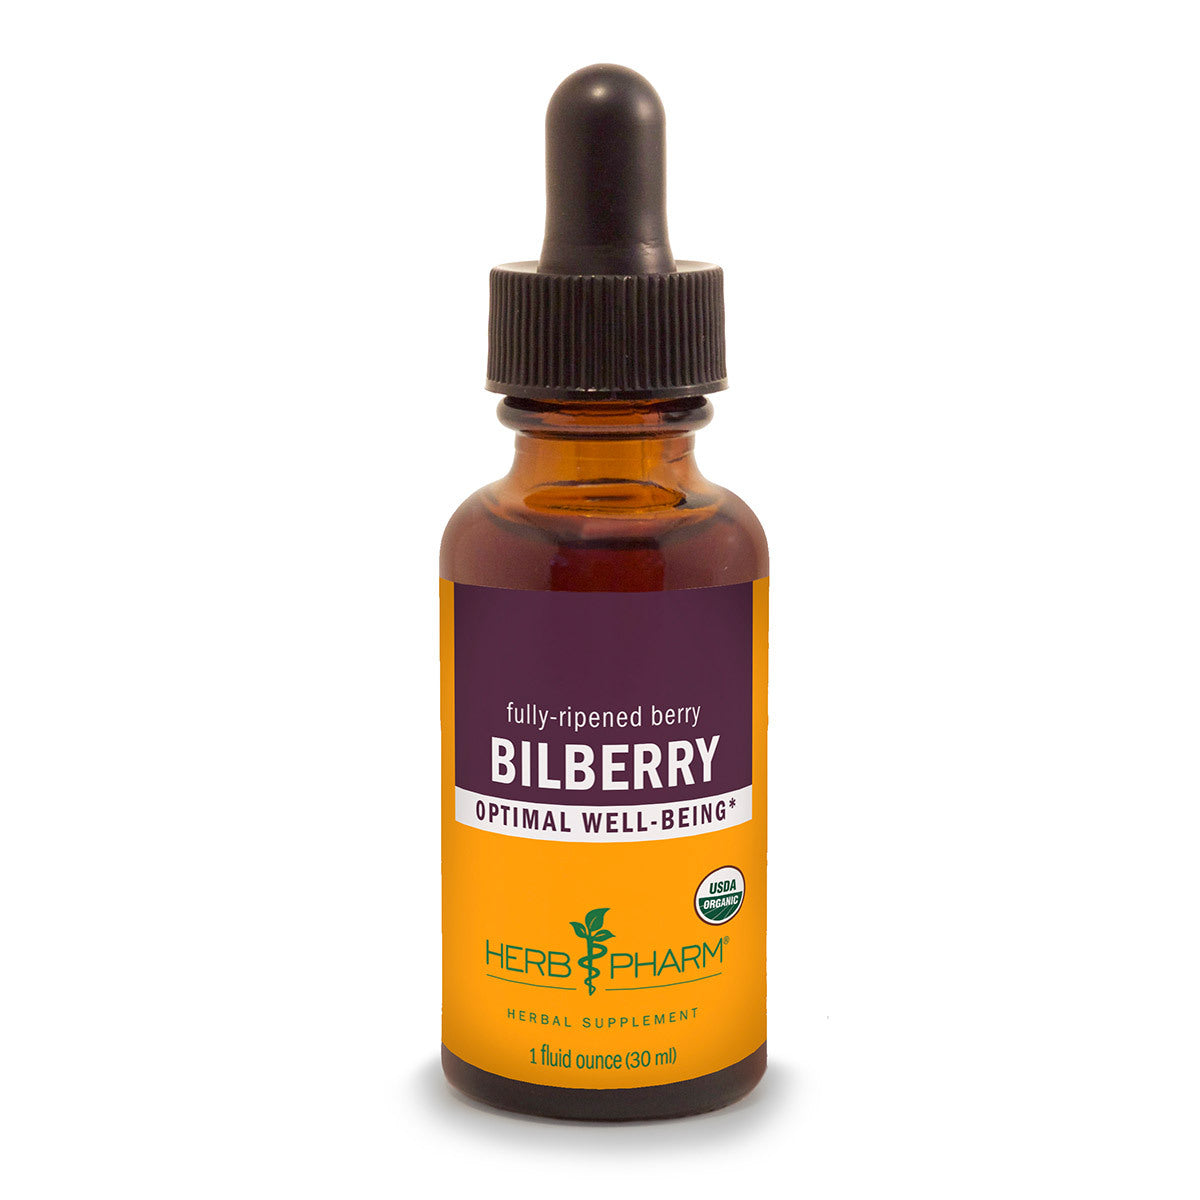 Primary image of Bilberry Extract